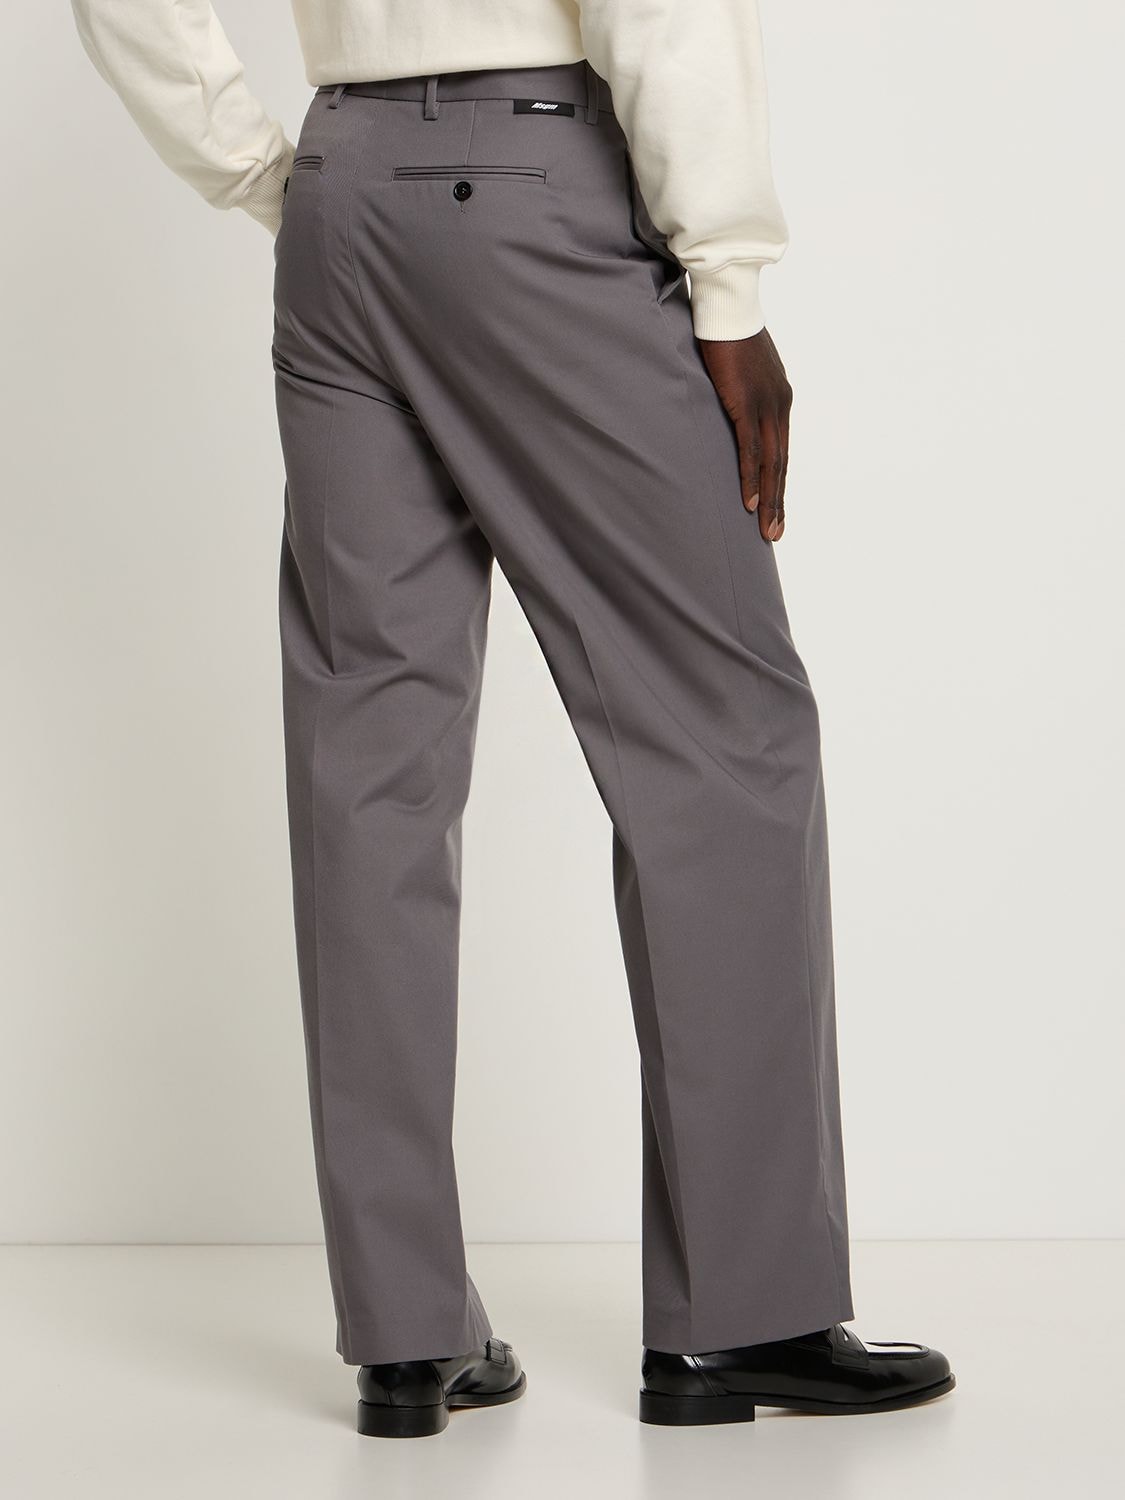 Msgm pants in cotton blend